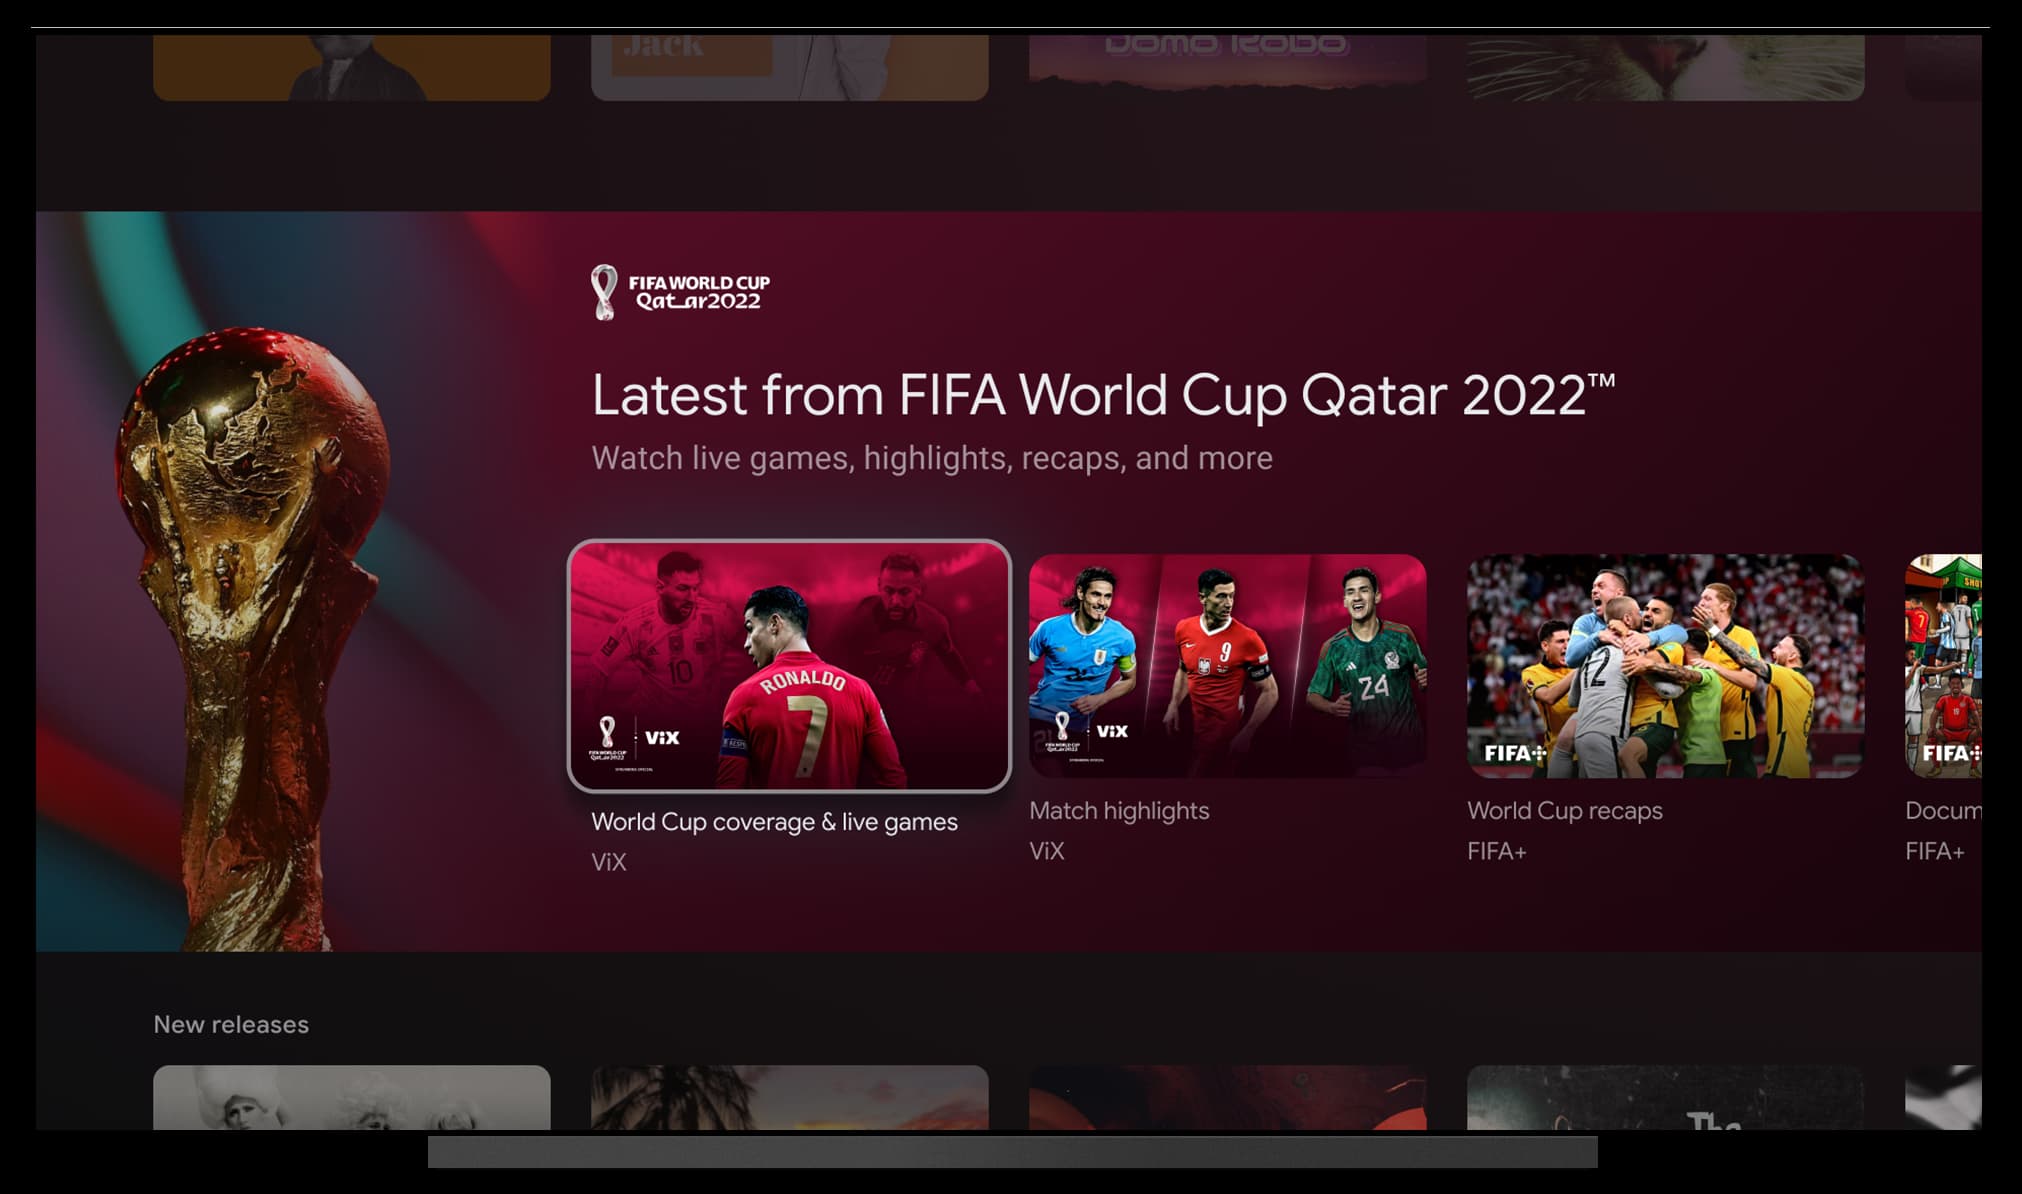 Google will show nearby places airing World Cup 2022 matches